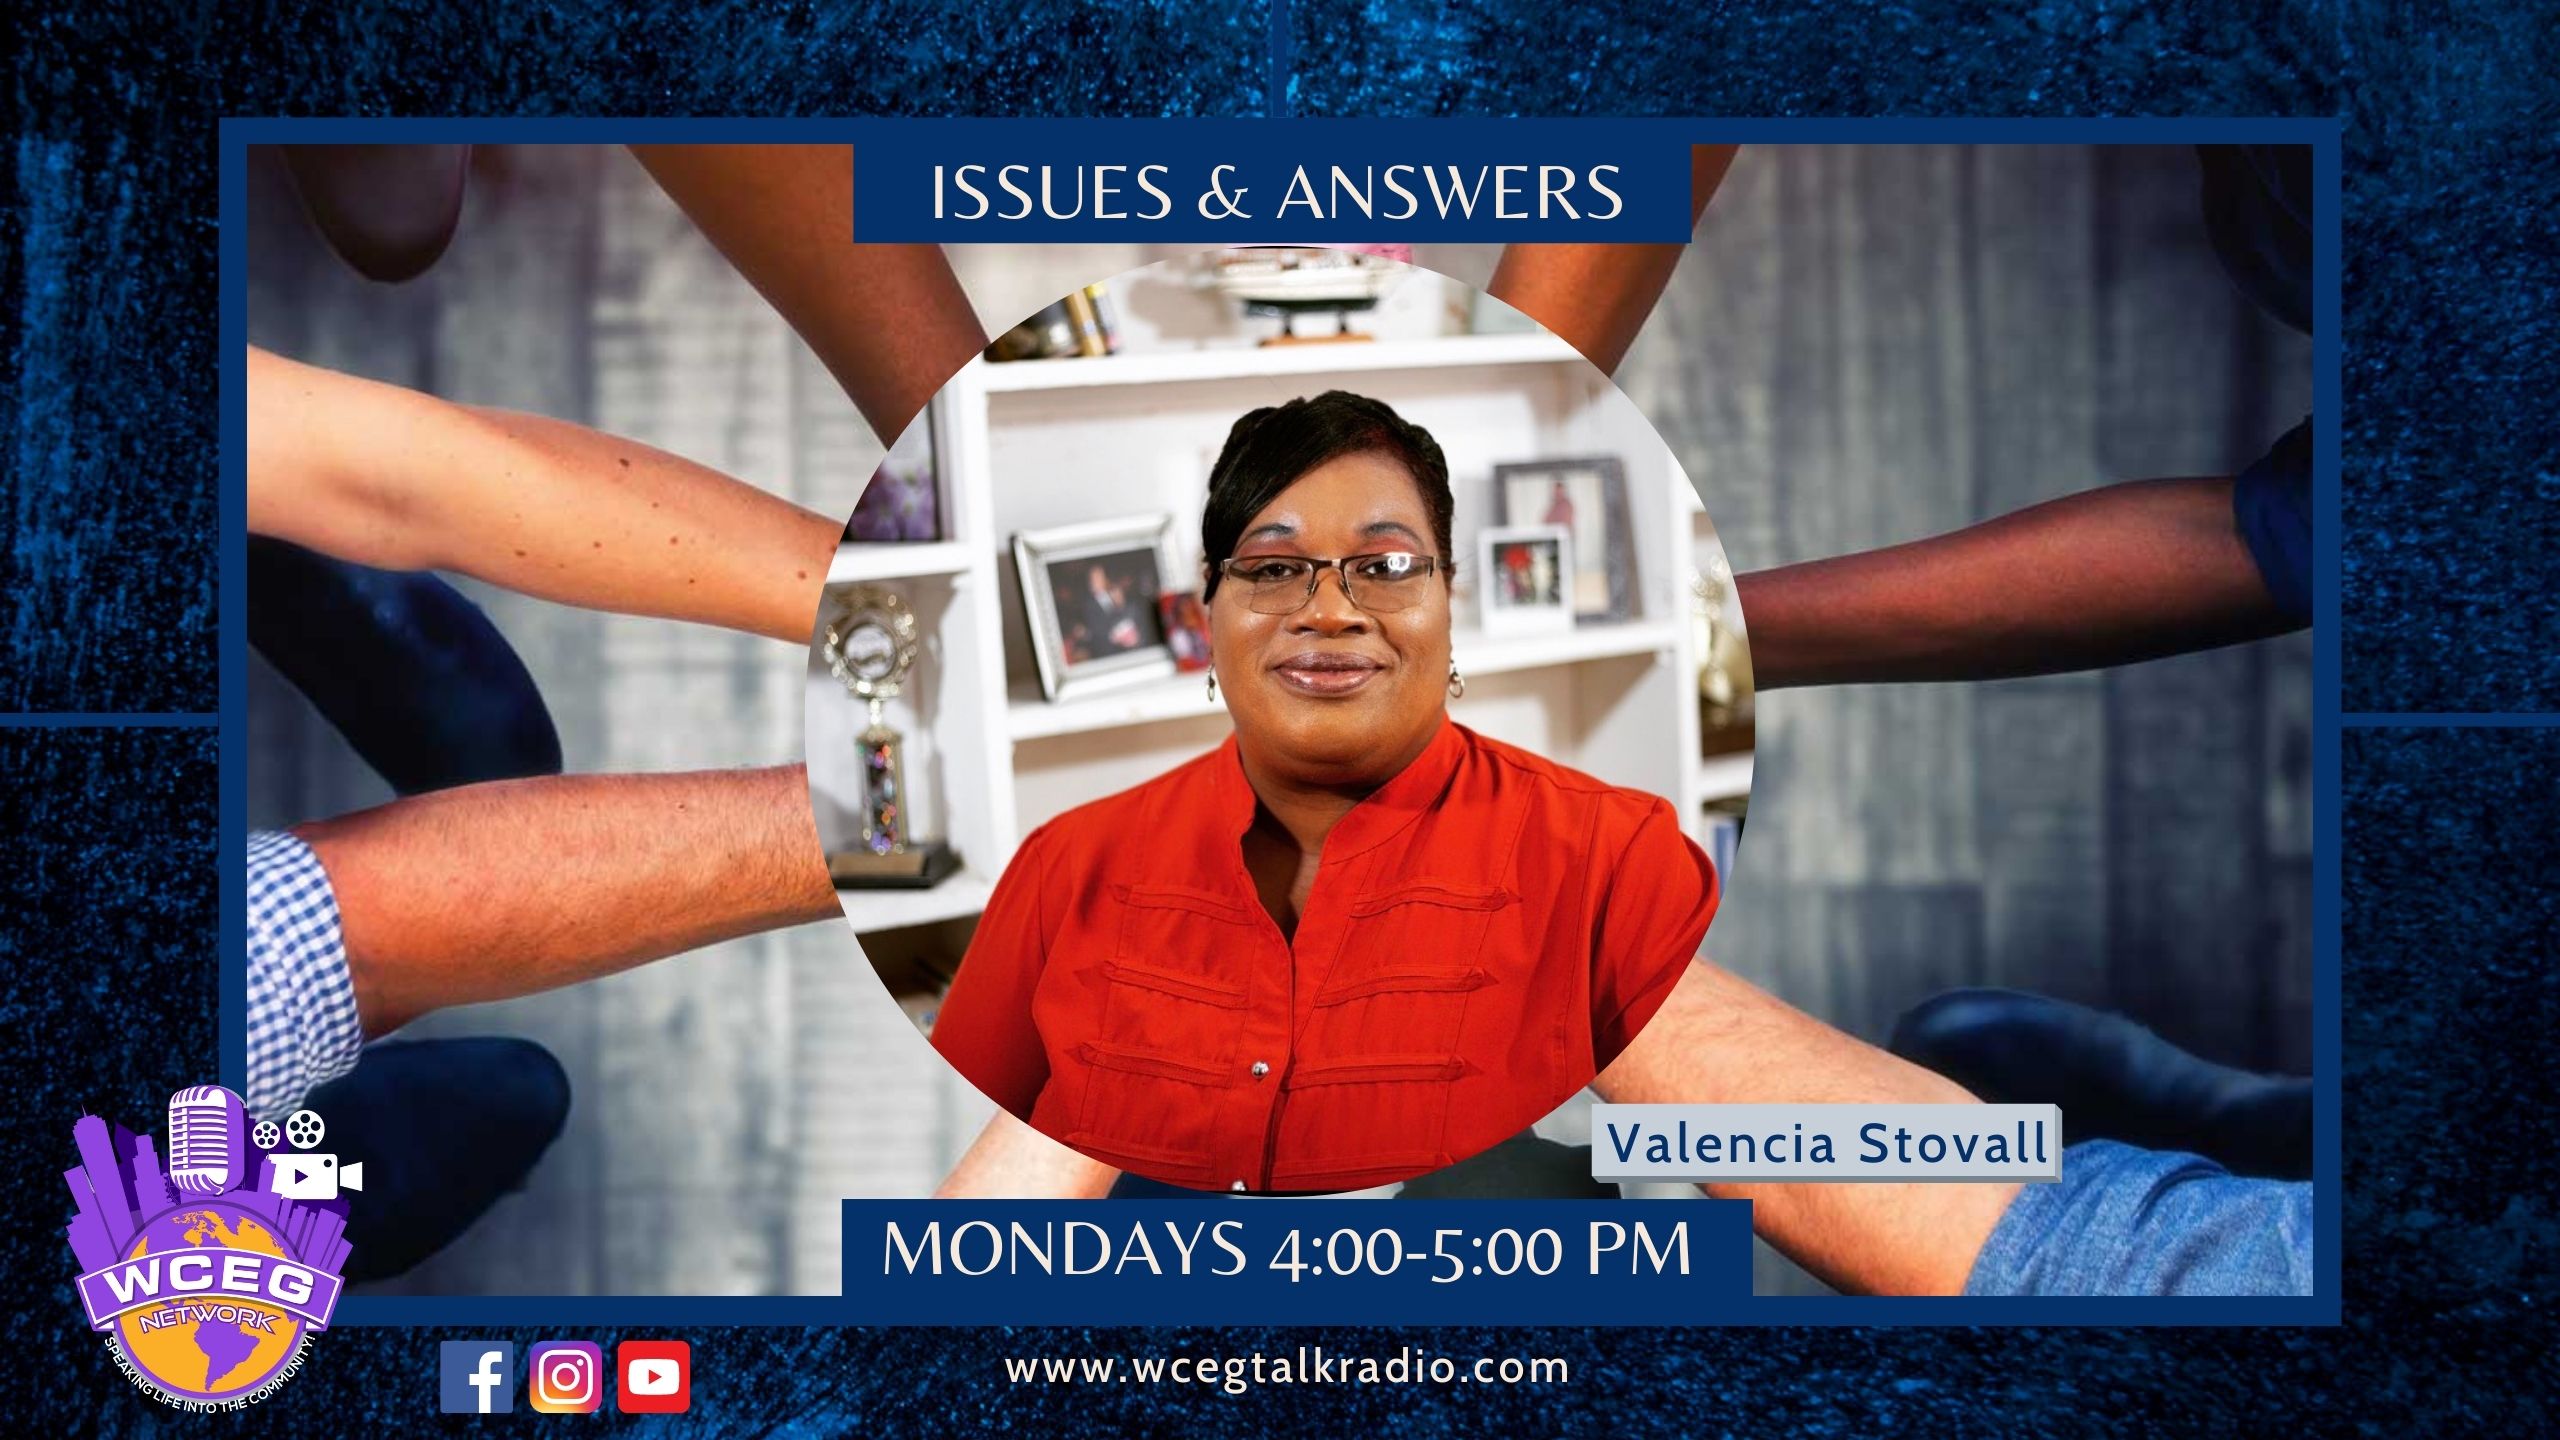 Issues & Answers with Valencia Stovall